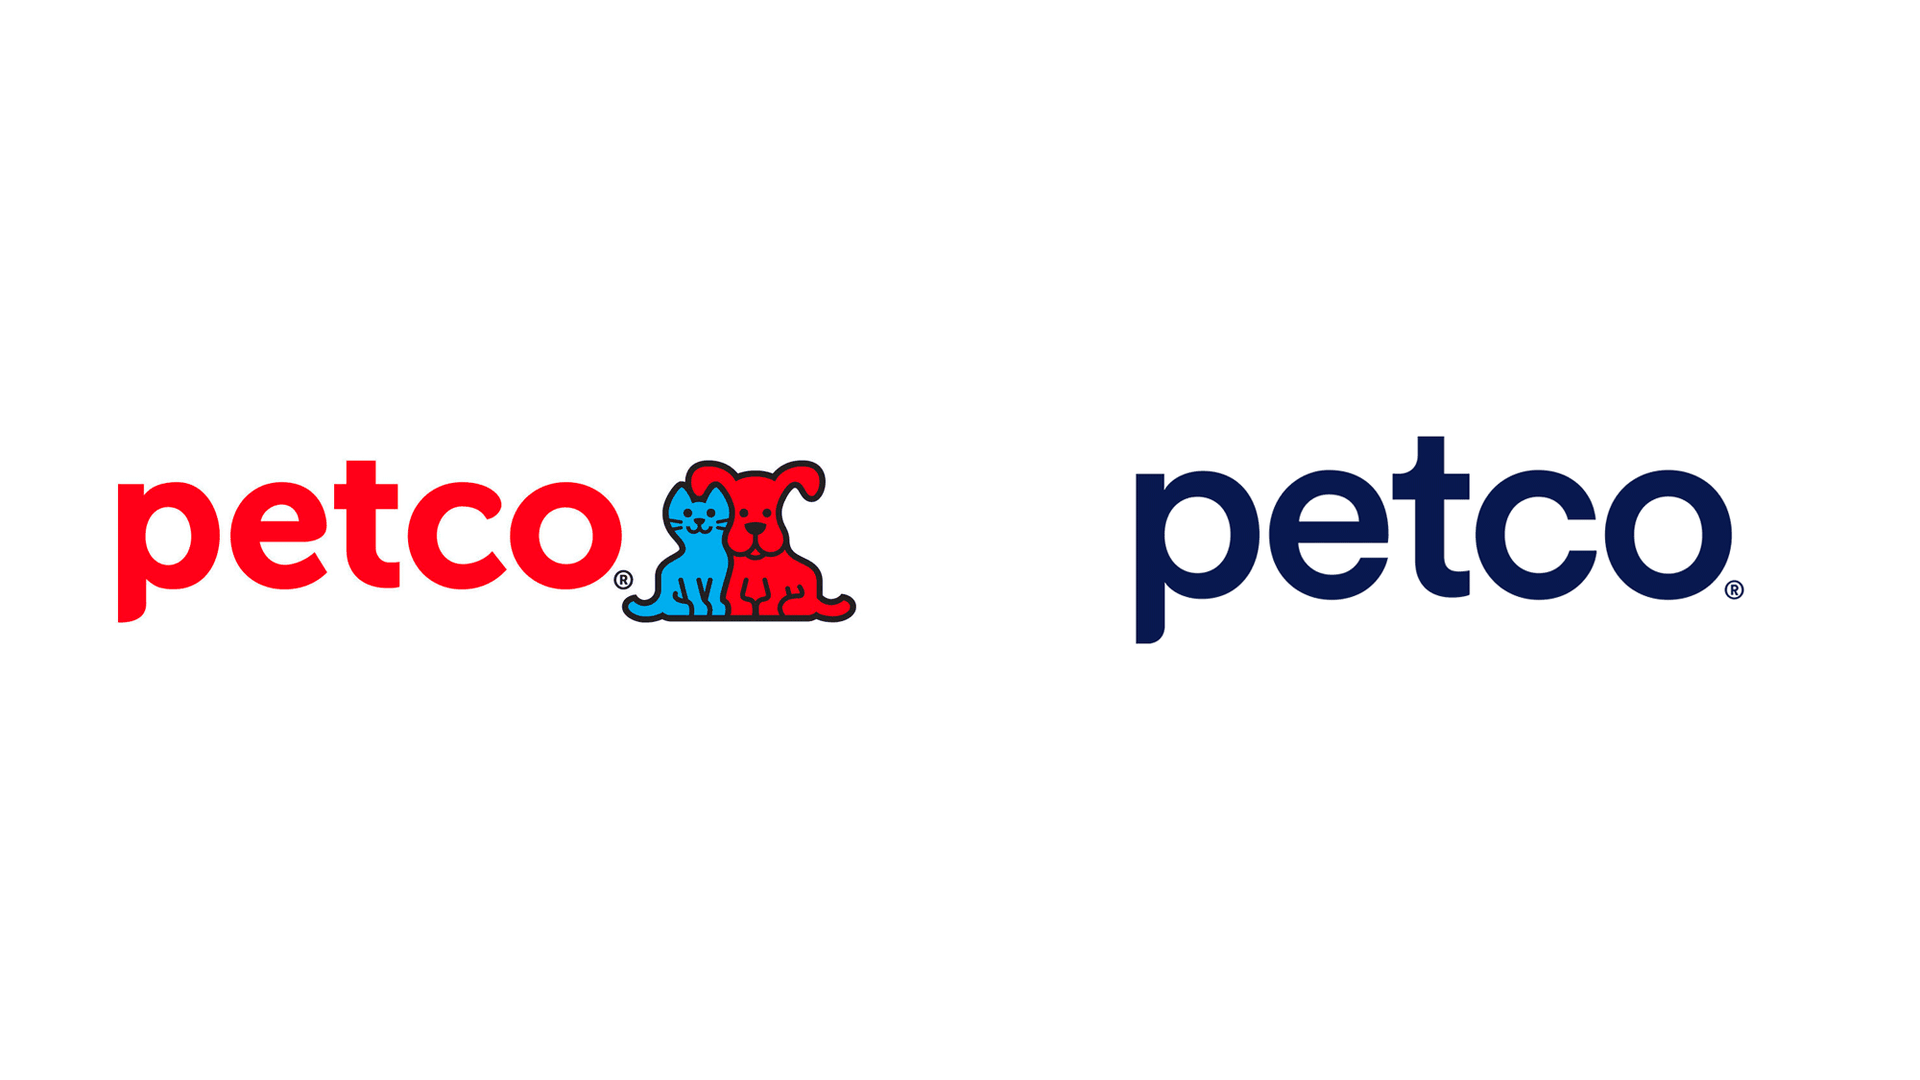 The Petco logo, before and after